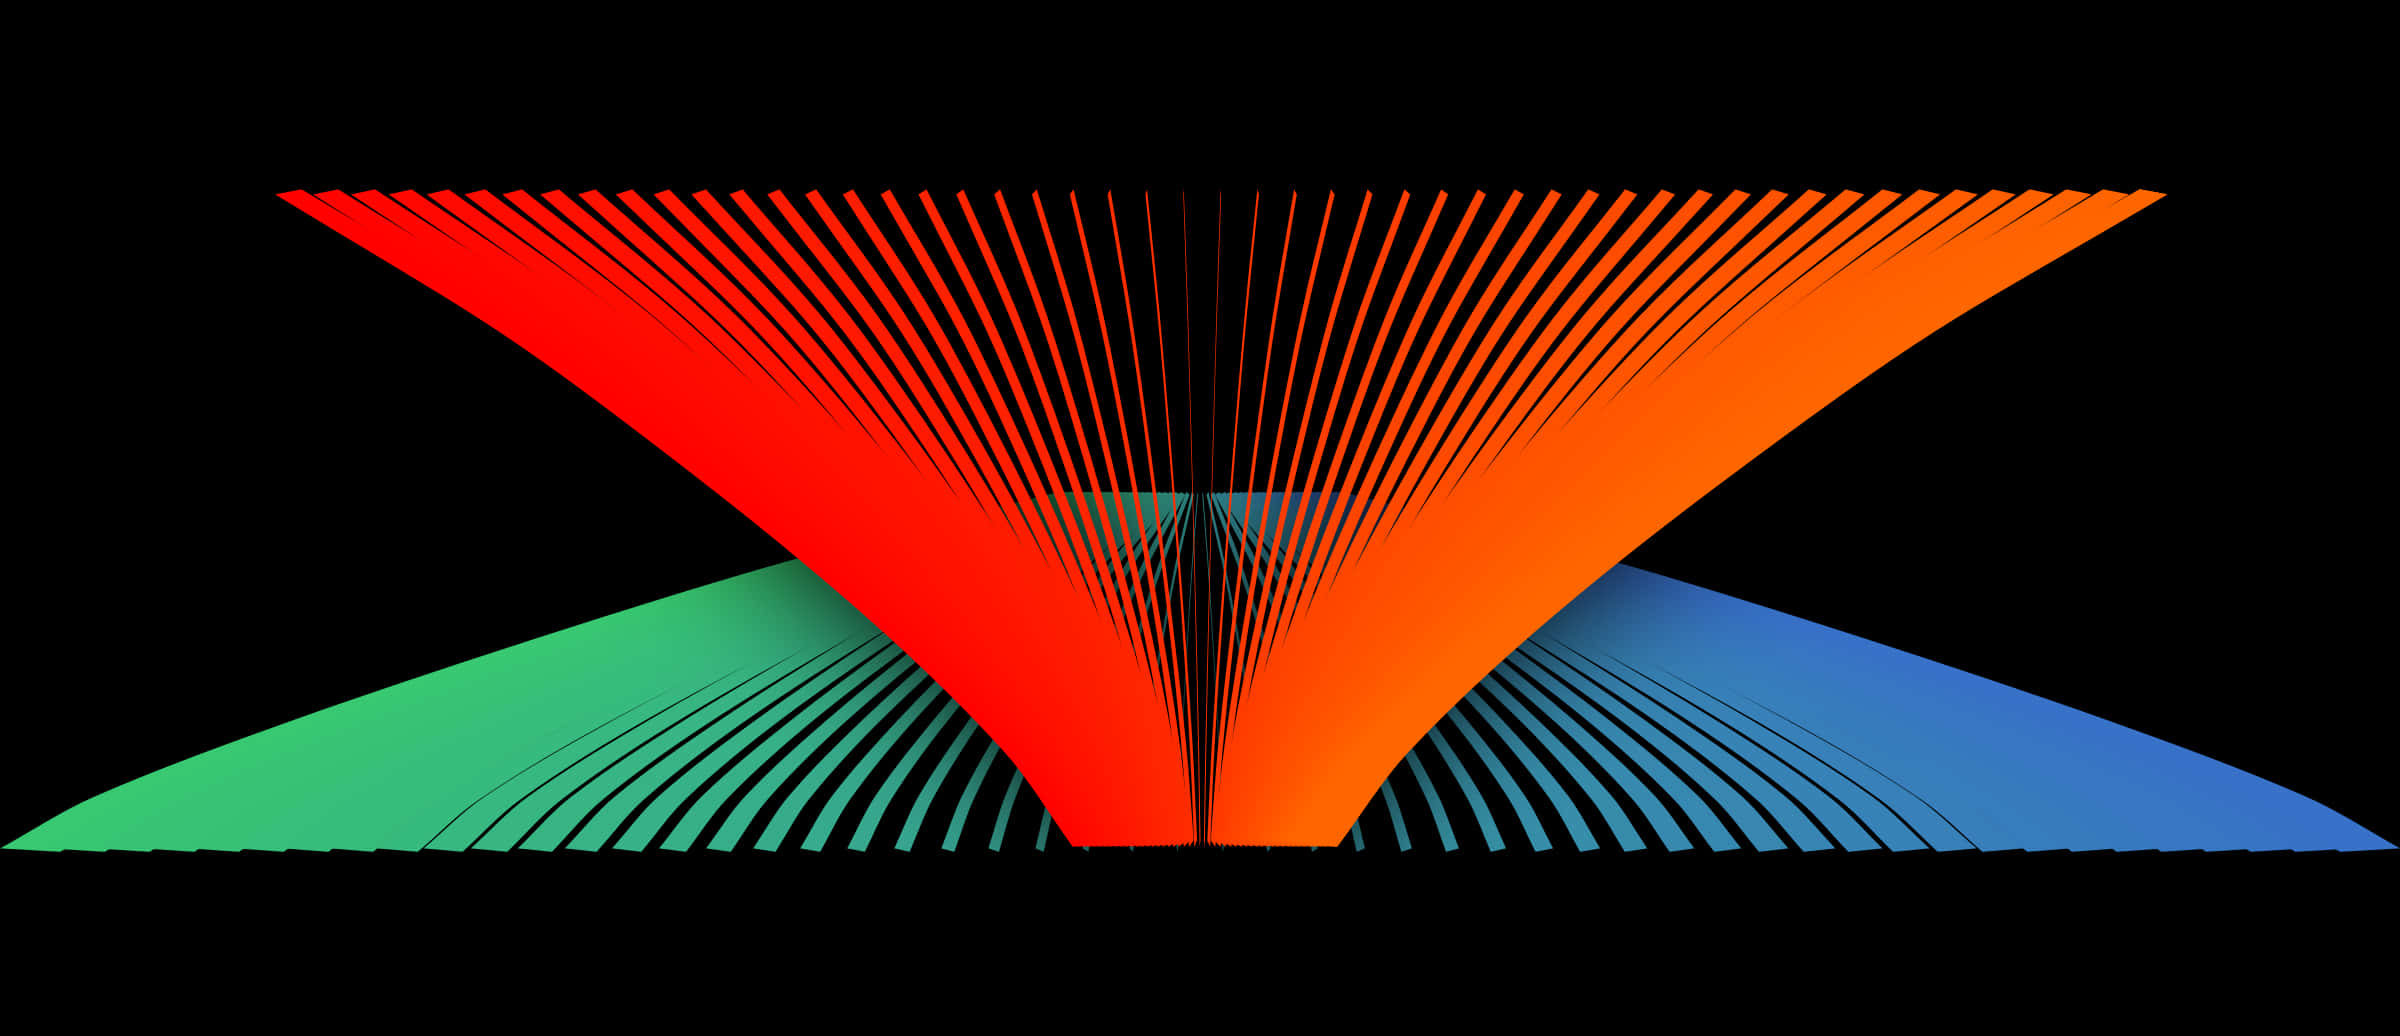 A Colorful Lines On A Black Background